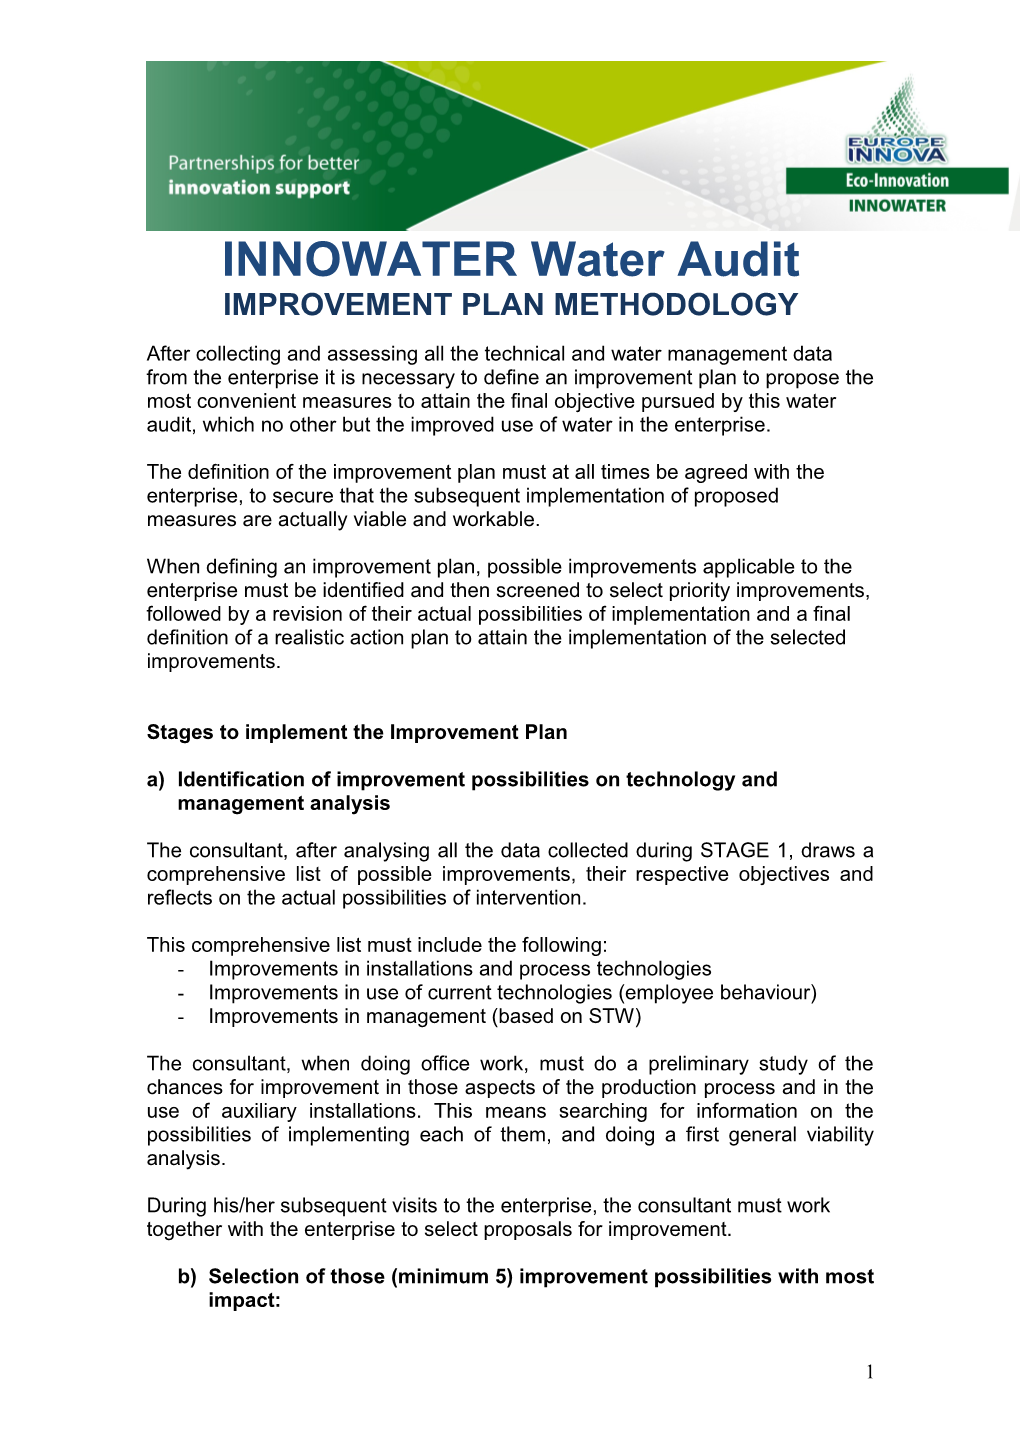 INNOWATER Water Audit